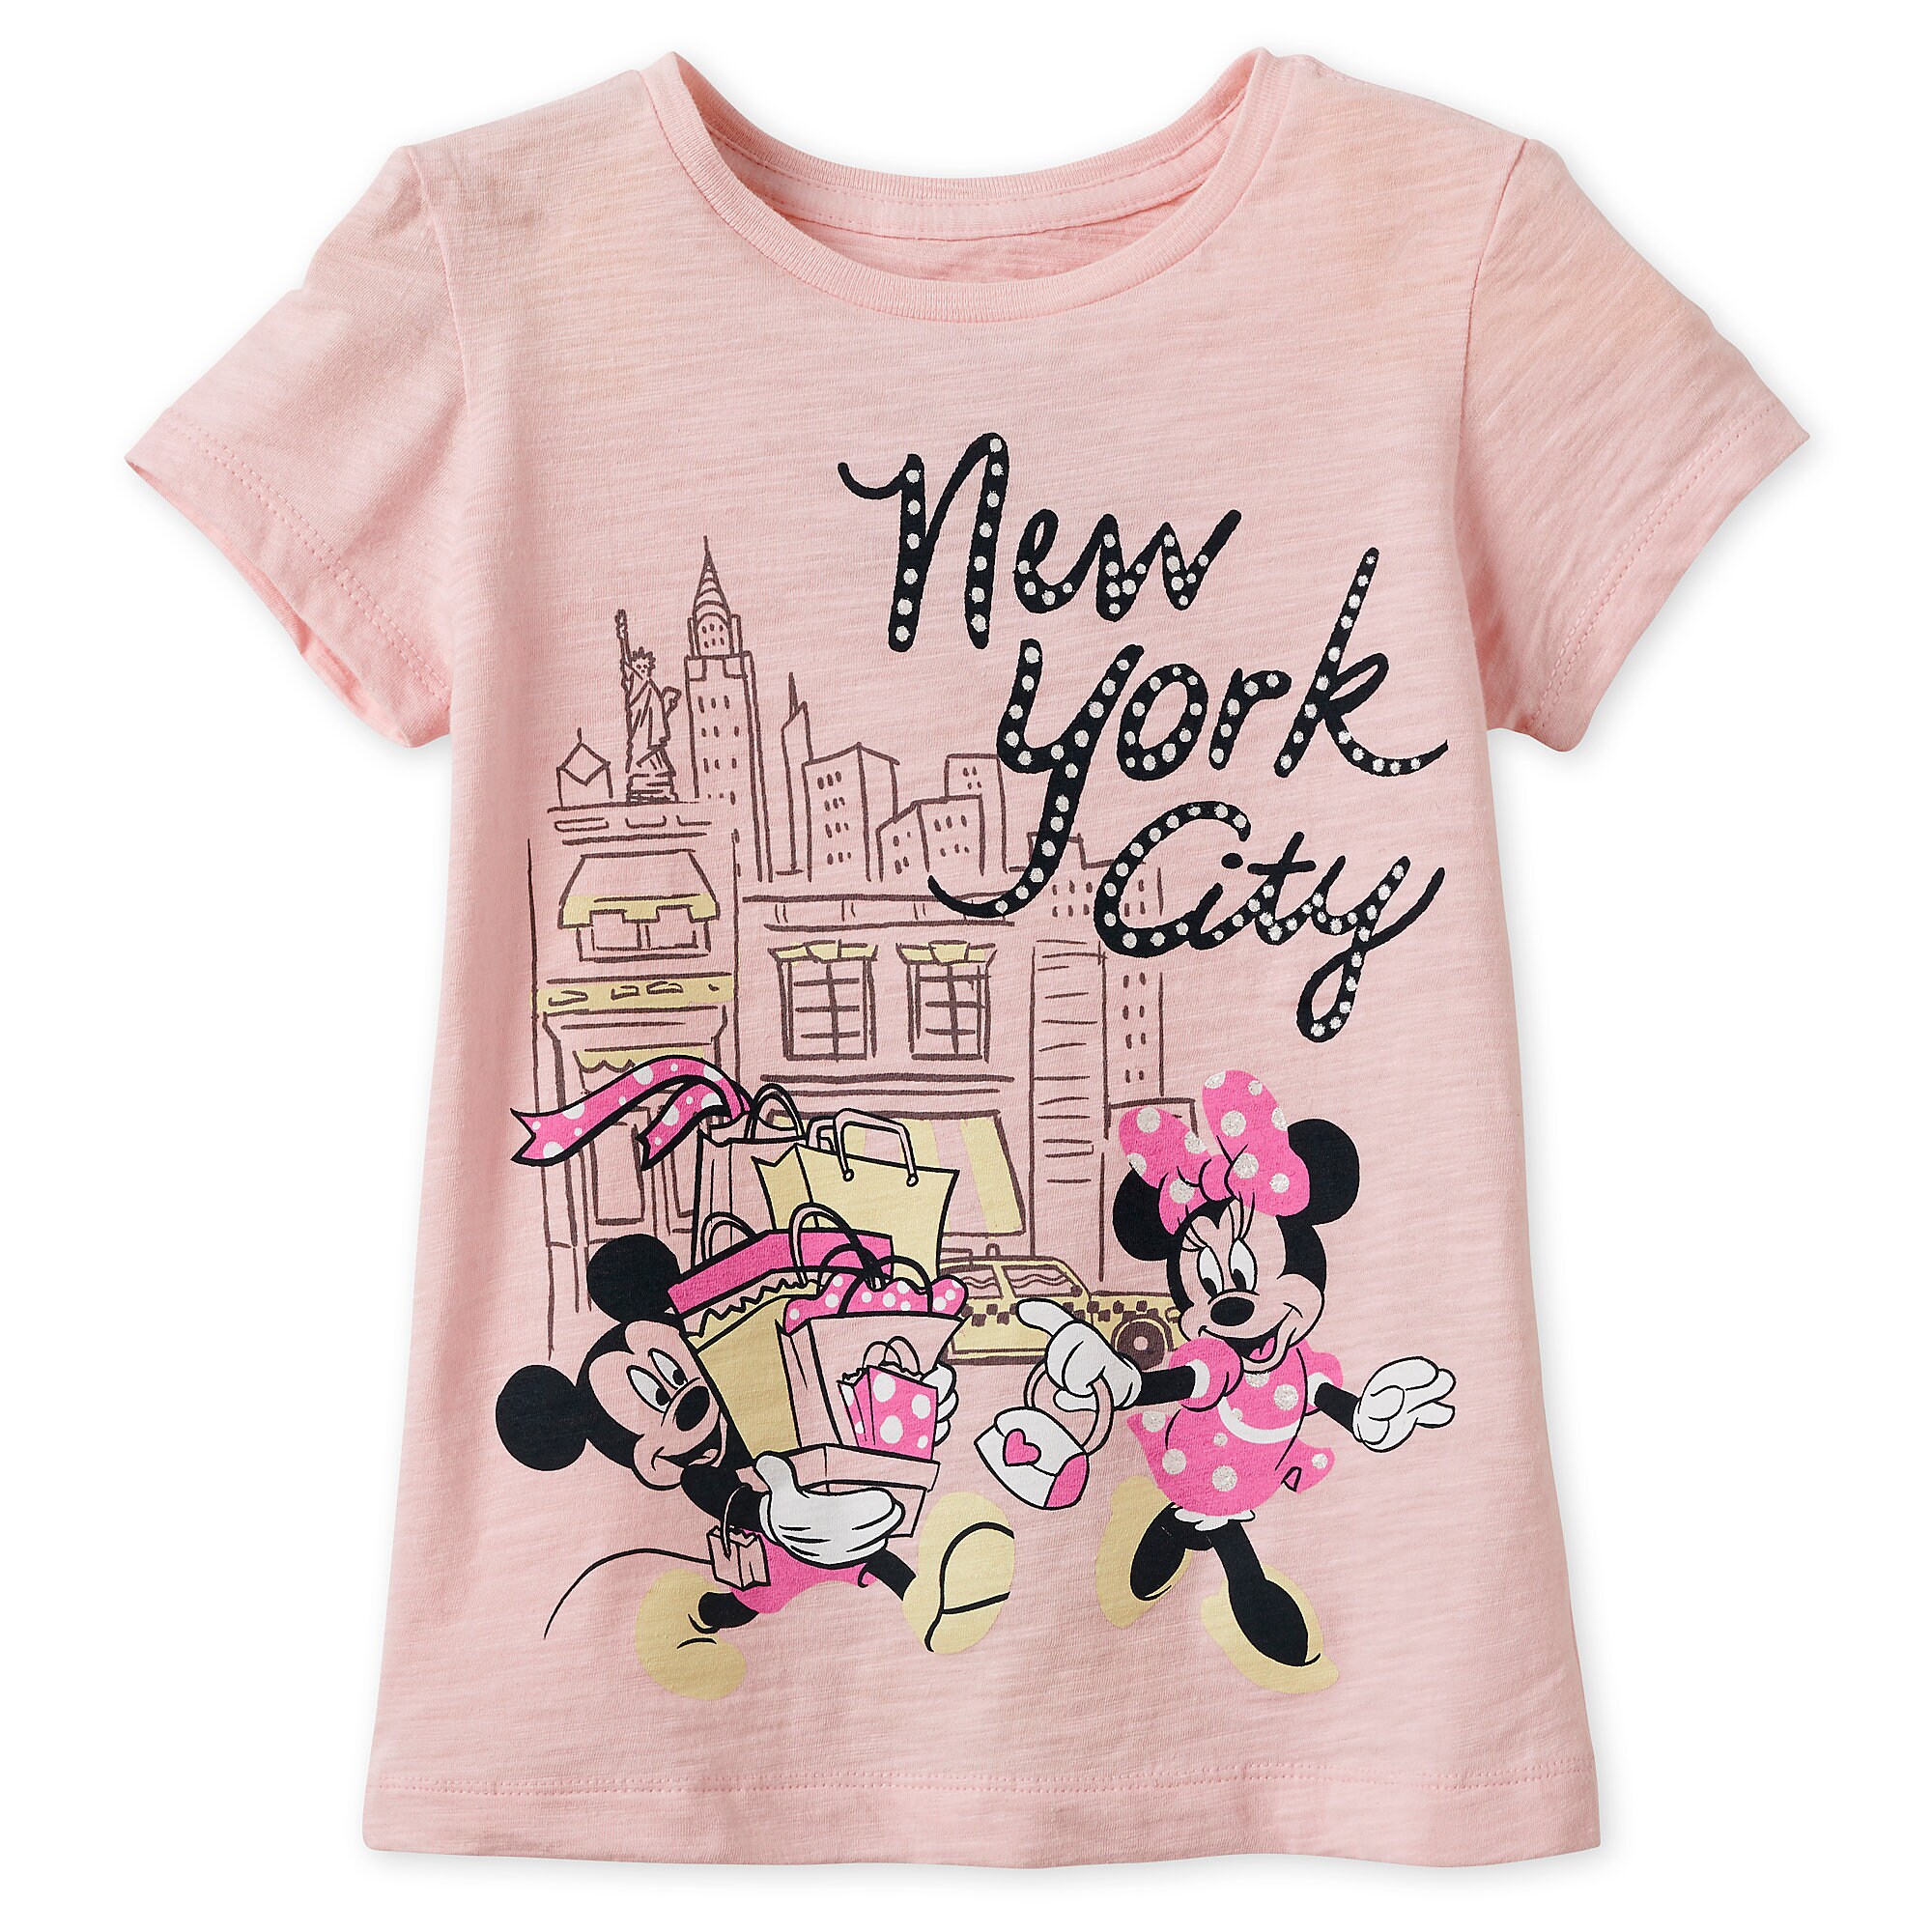 Mickey and Minnie Mouse Shopping T-Shirt for Girls - New York City